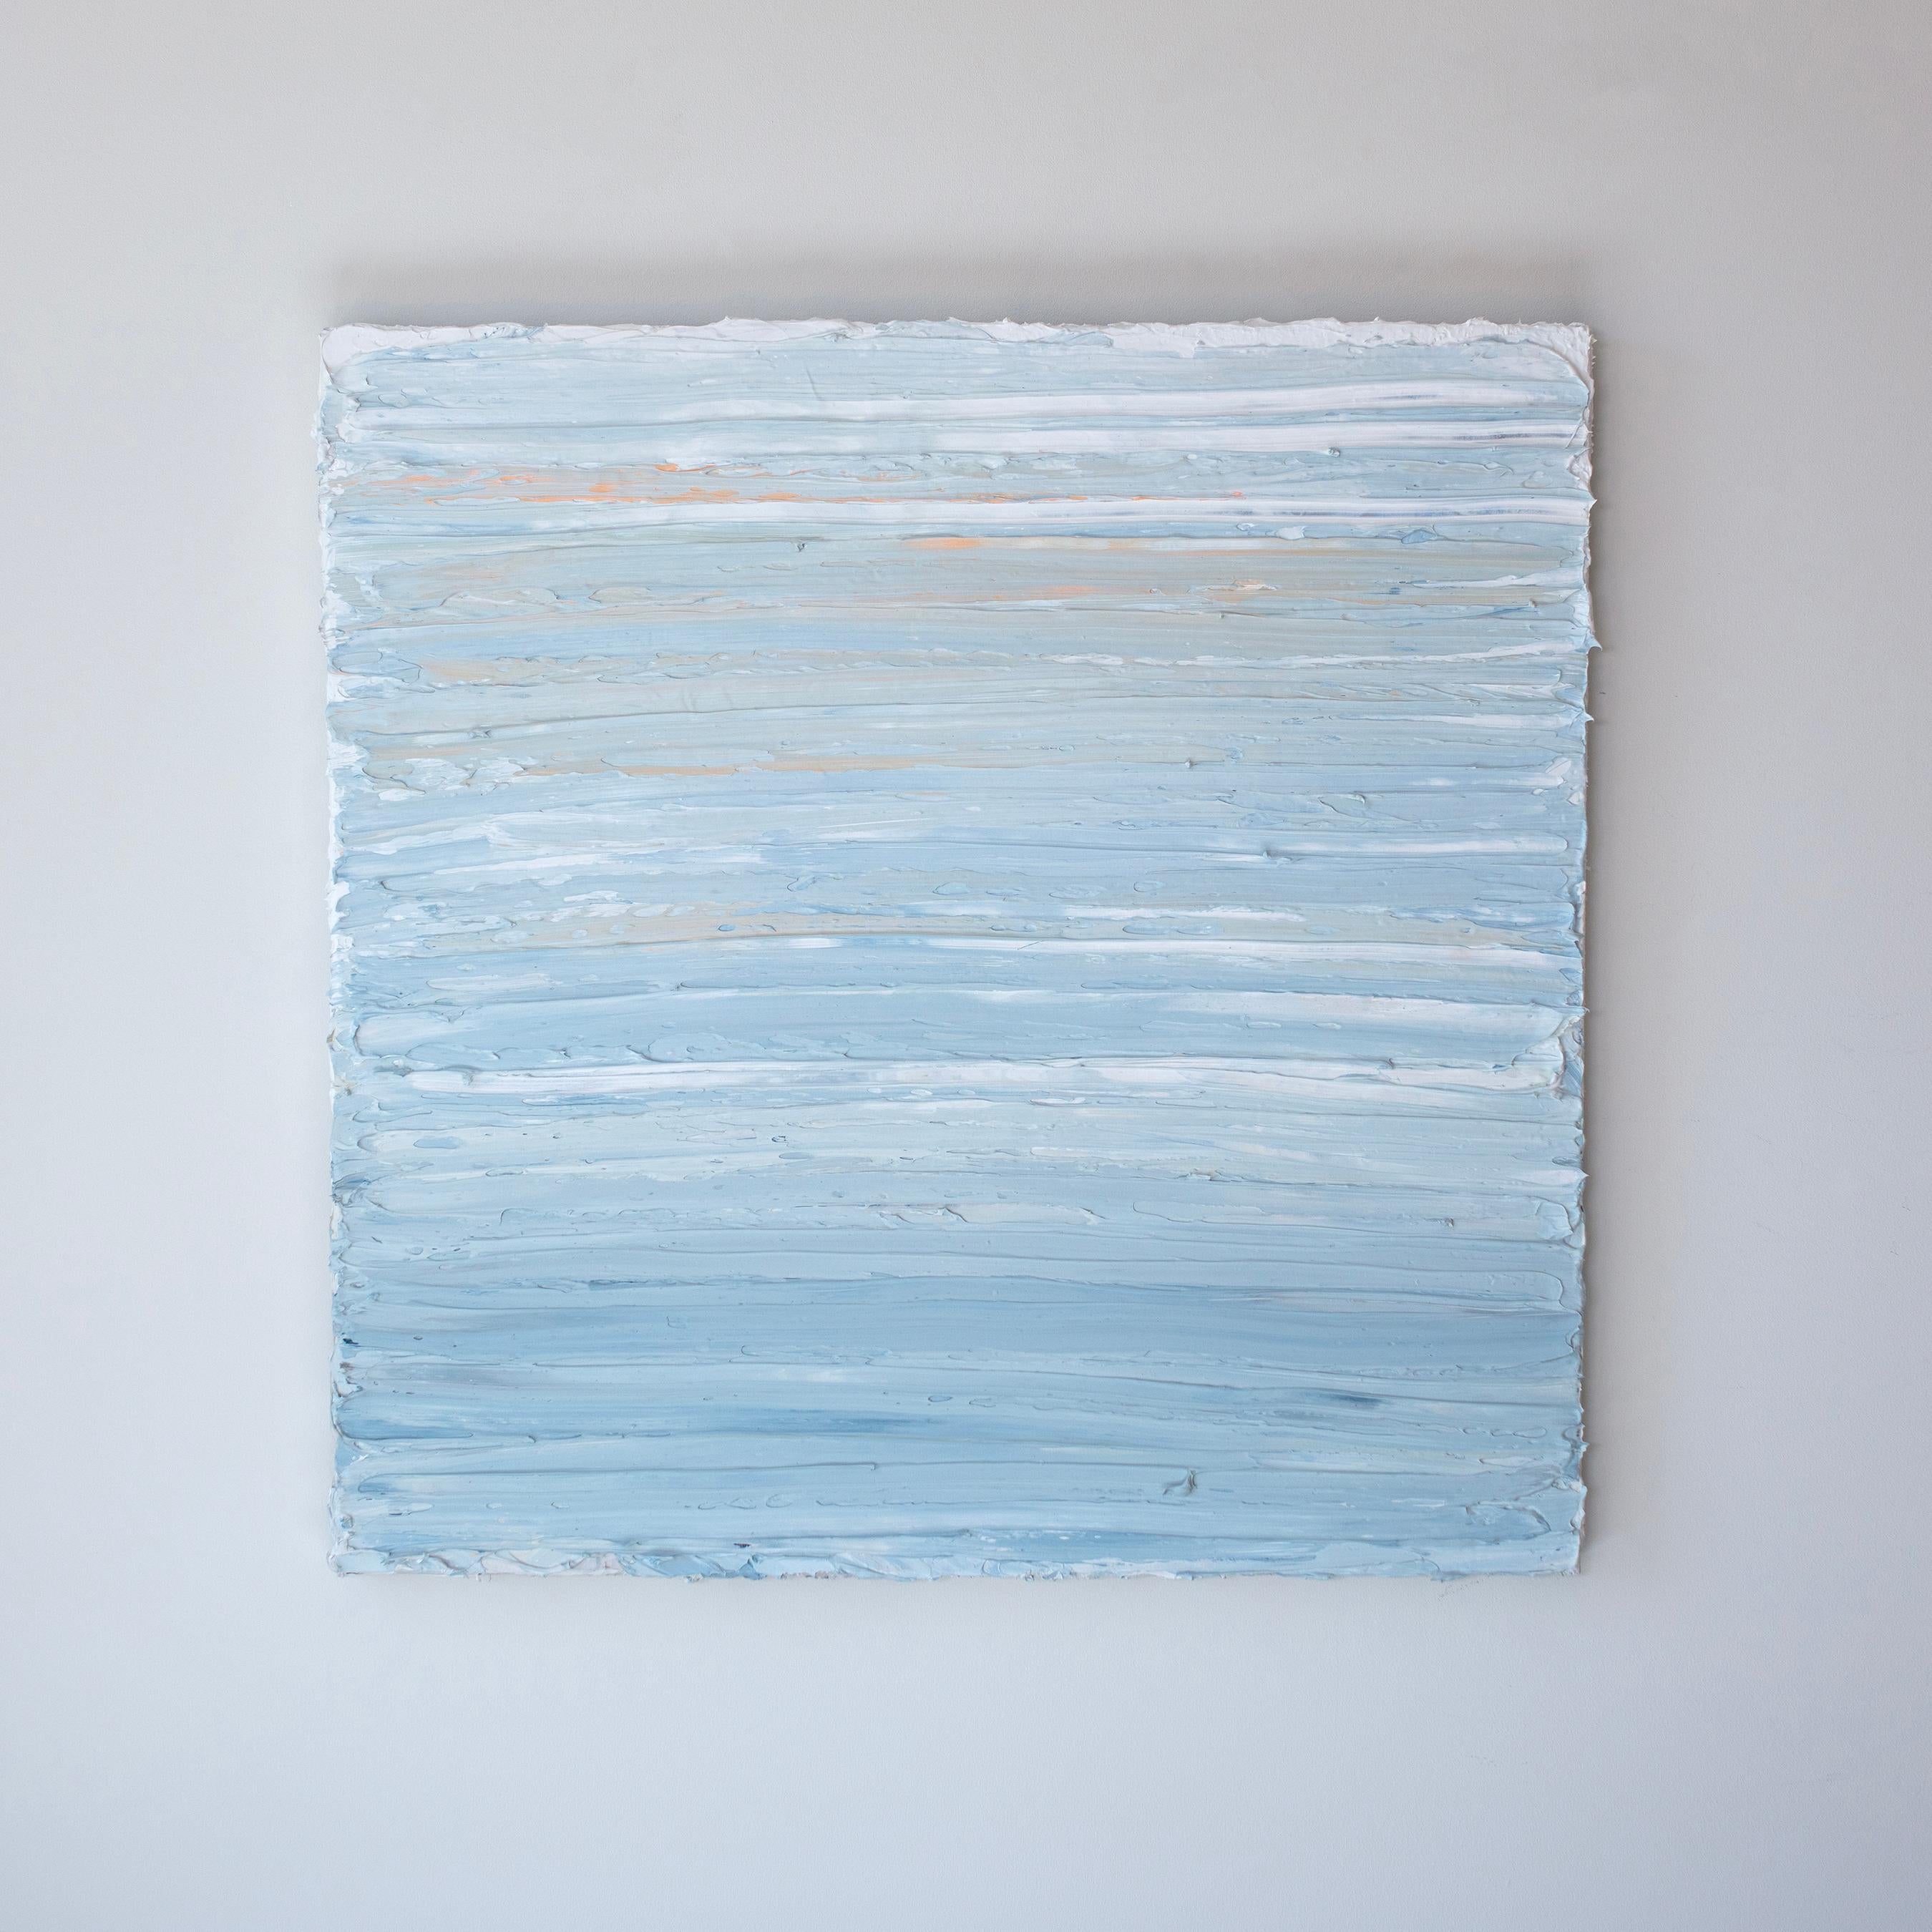 This abstract painting by Teodora Guererra features a light, cool palette of blue and white with subtle orange accents at the top of the composition. The artist applies thick layers of oil paint in wide, horizontal gestures to create a thick, highly